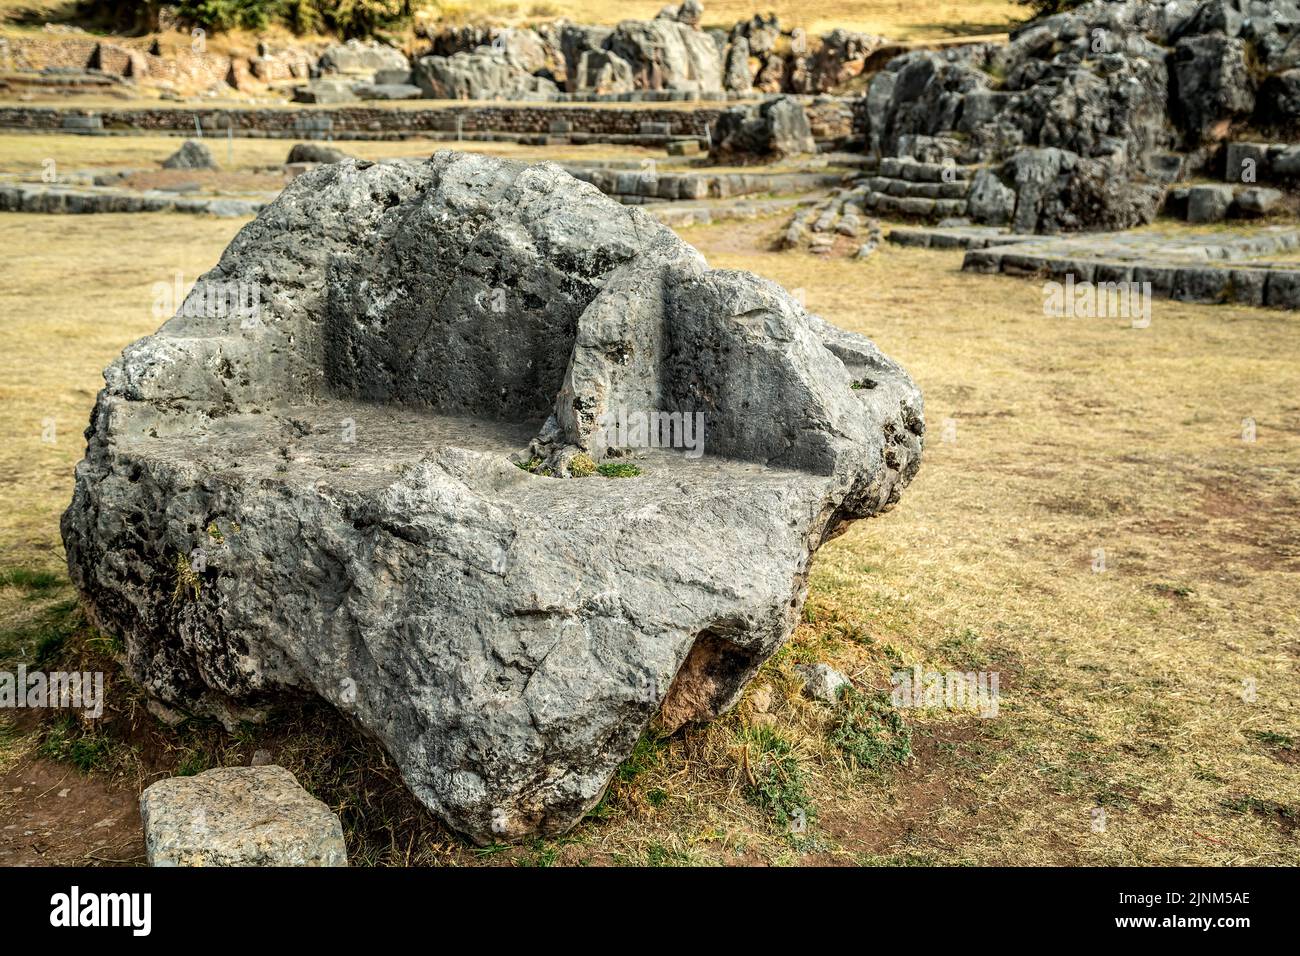 Carved stone throne, Rodadero section, Sacsayhuaman Inca fortress, Cusco, Peru Stock Photo